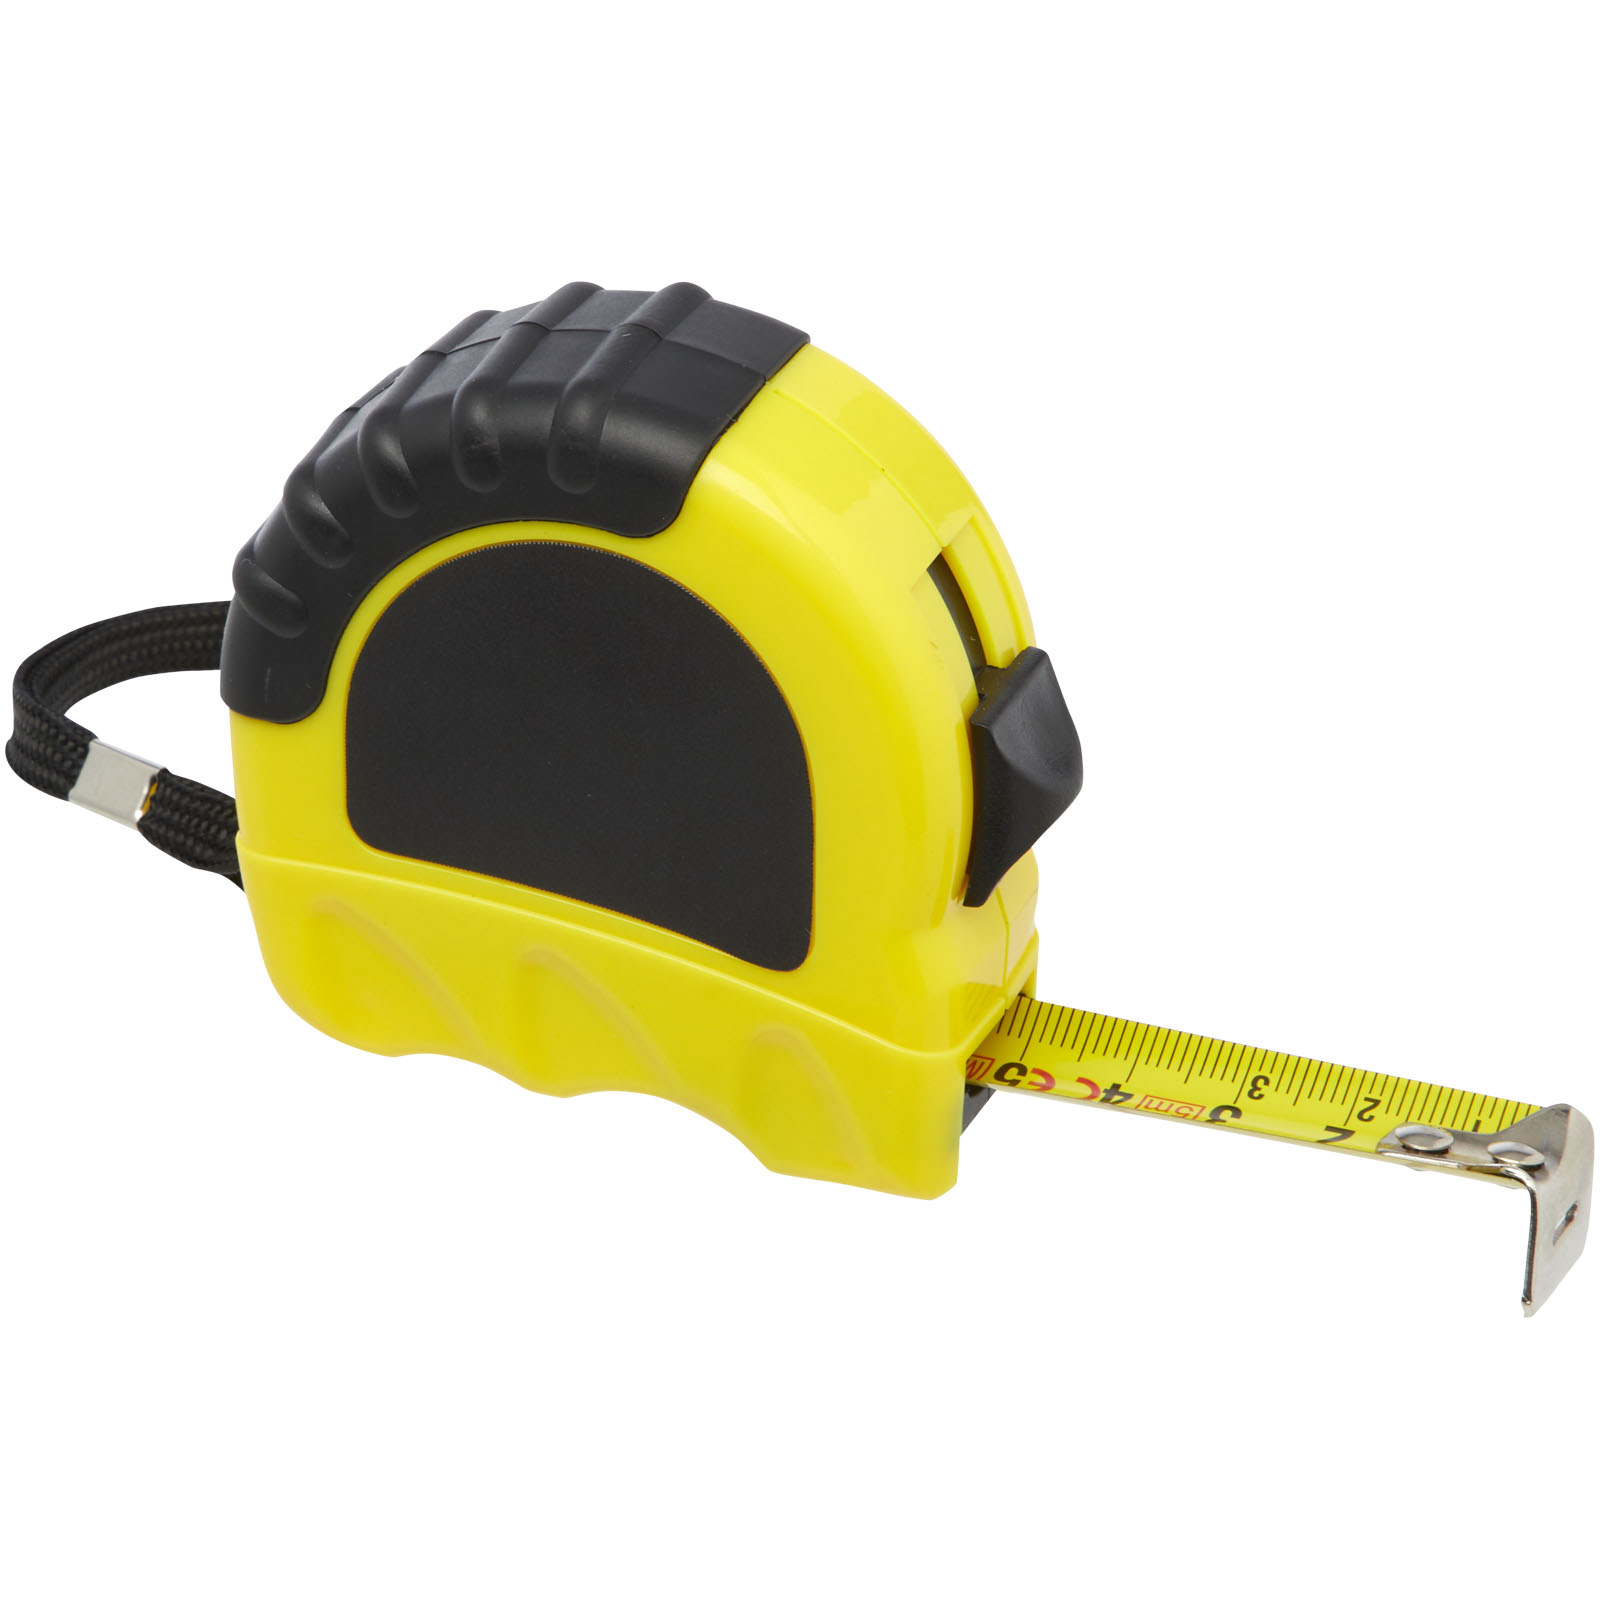 Tools & Car Accessories - Rule 5-metre RCS recycled plastic measuring tape